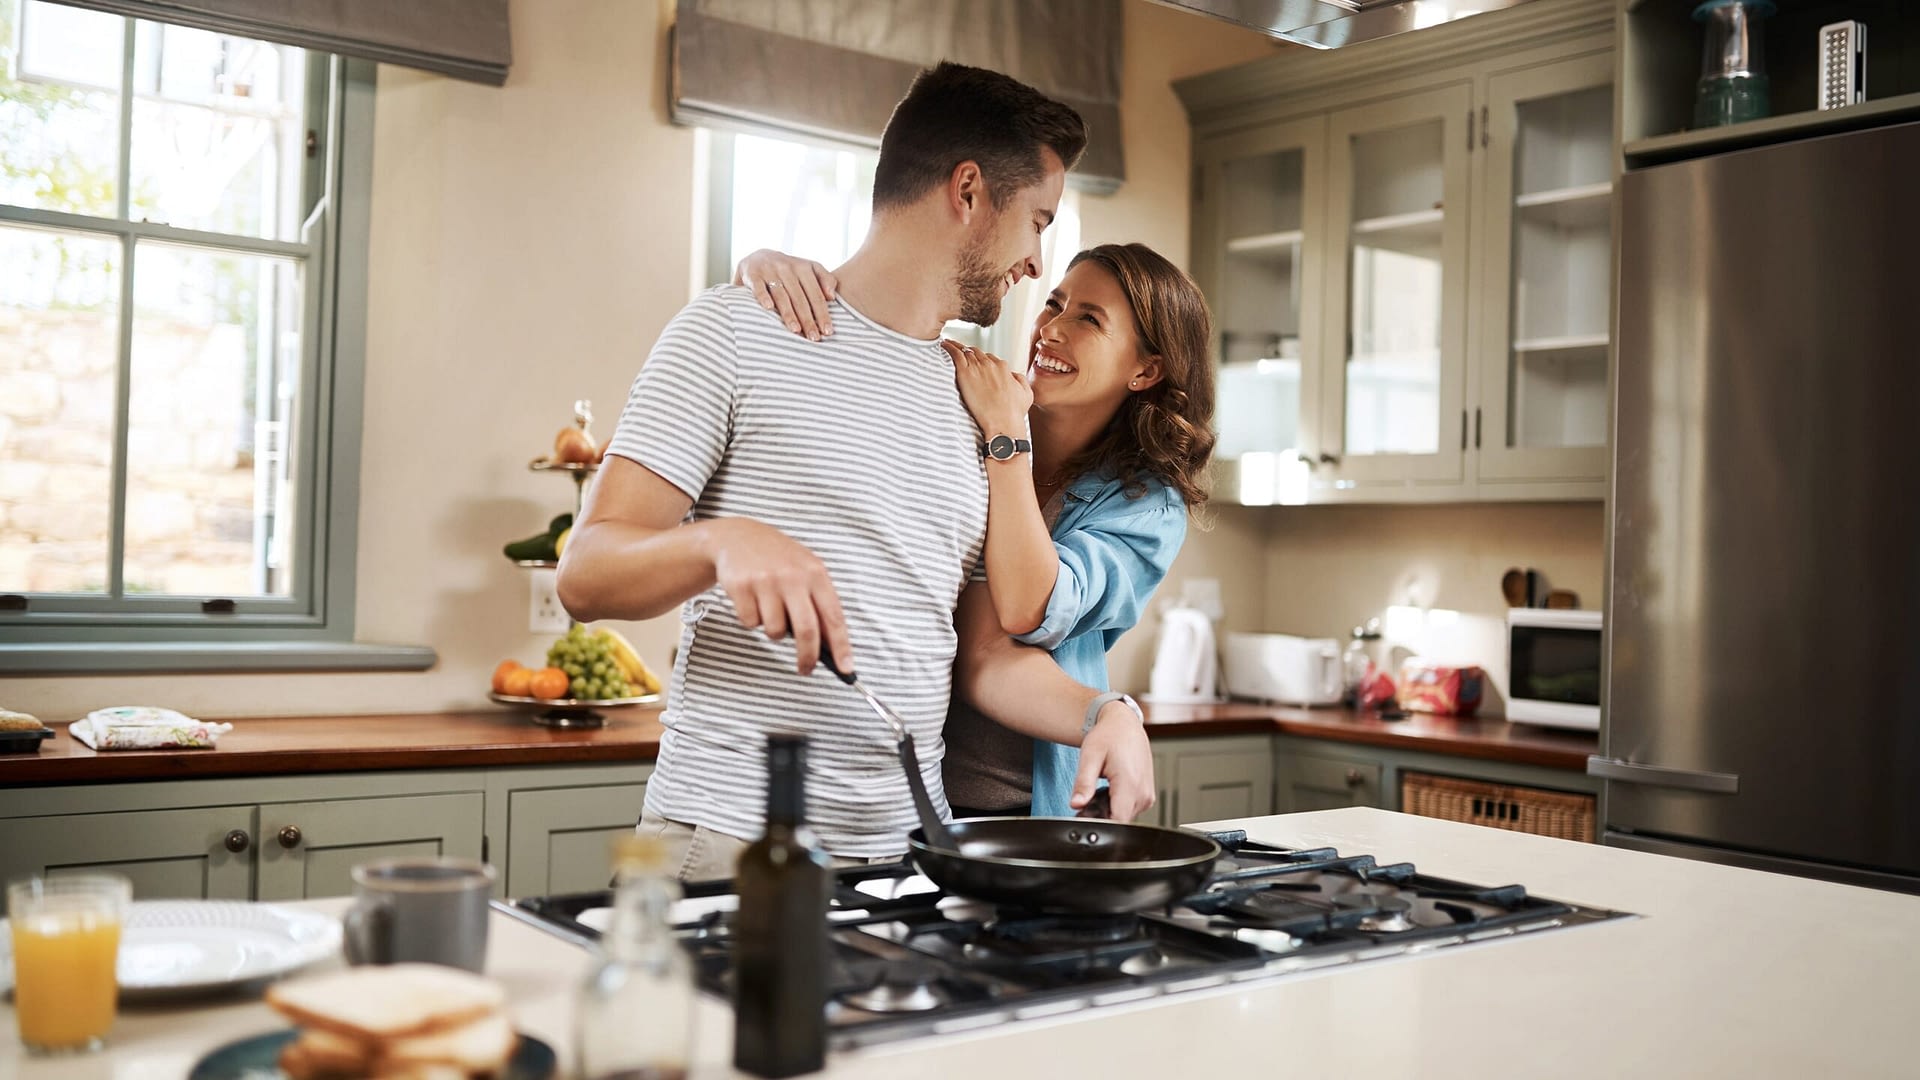 Young woman embracing her partner while he cooks breakfast in the kitchen.